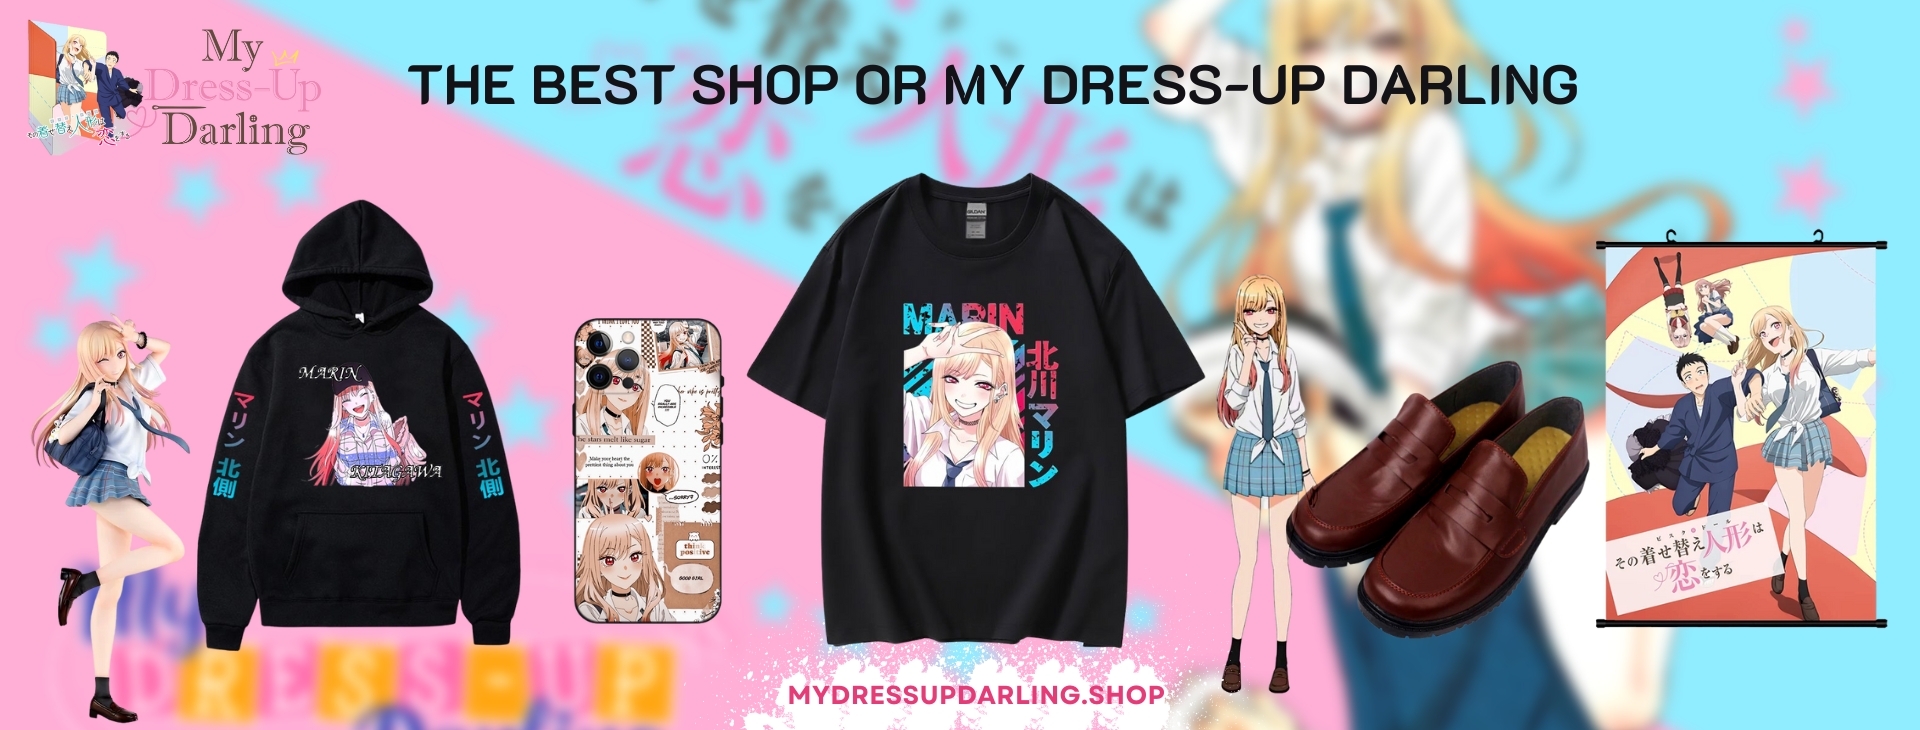 Shopping with Gojo-kun! 😁 Anime:My dress up darling Character:Kitagawa  Marin !remember to save the publication to reach more…